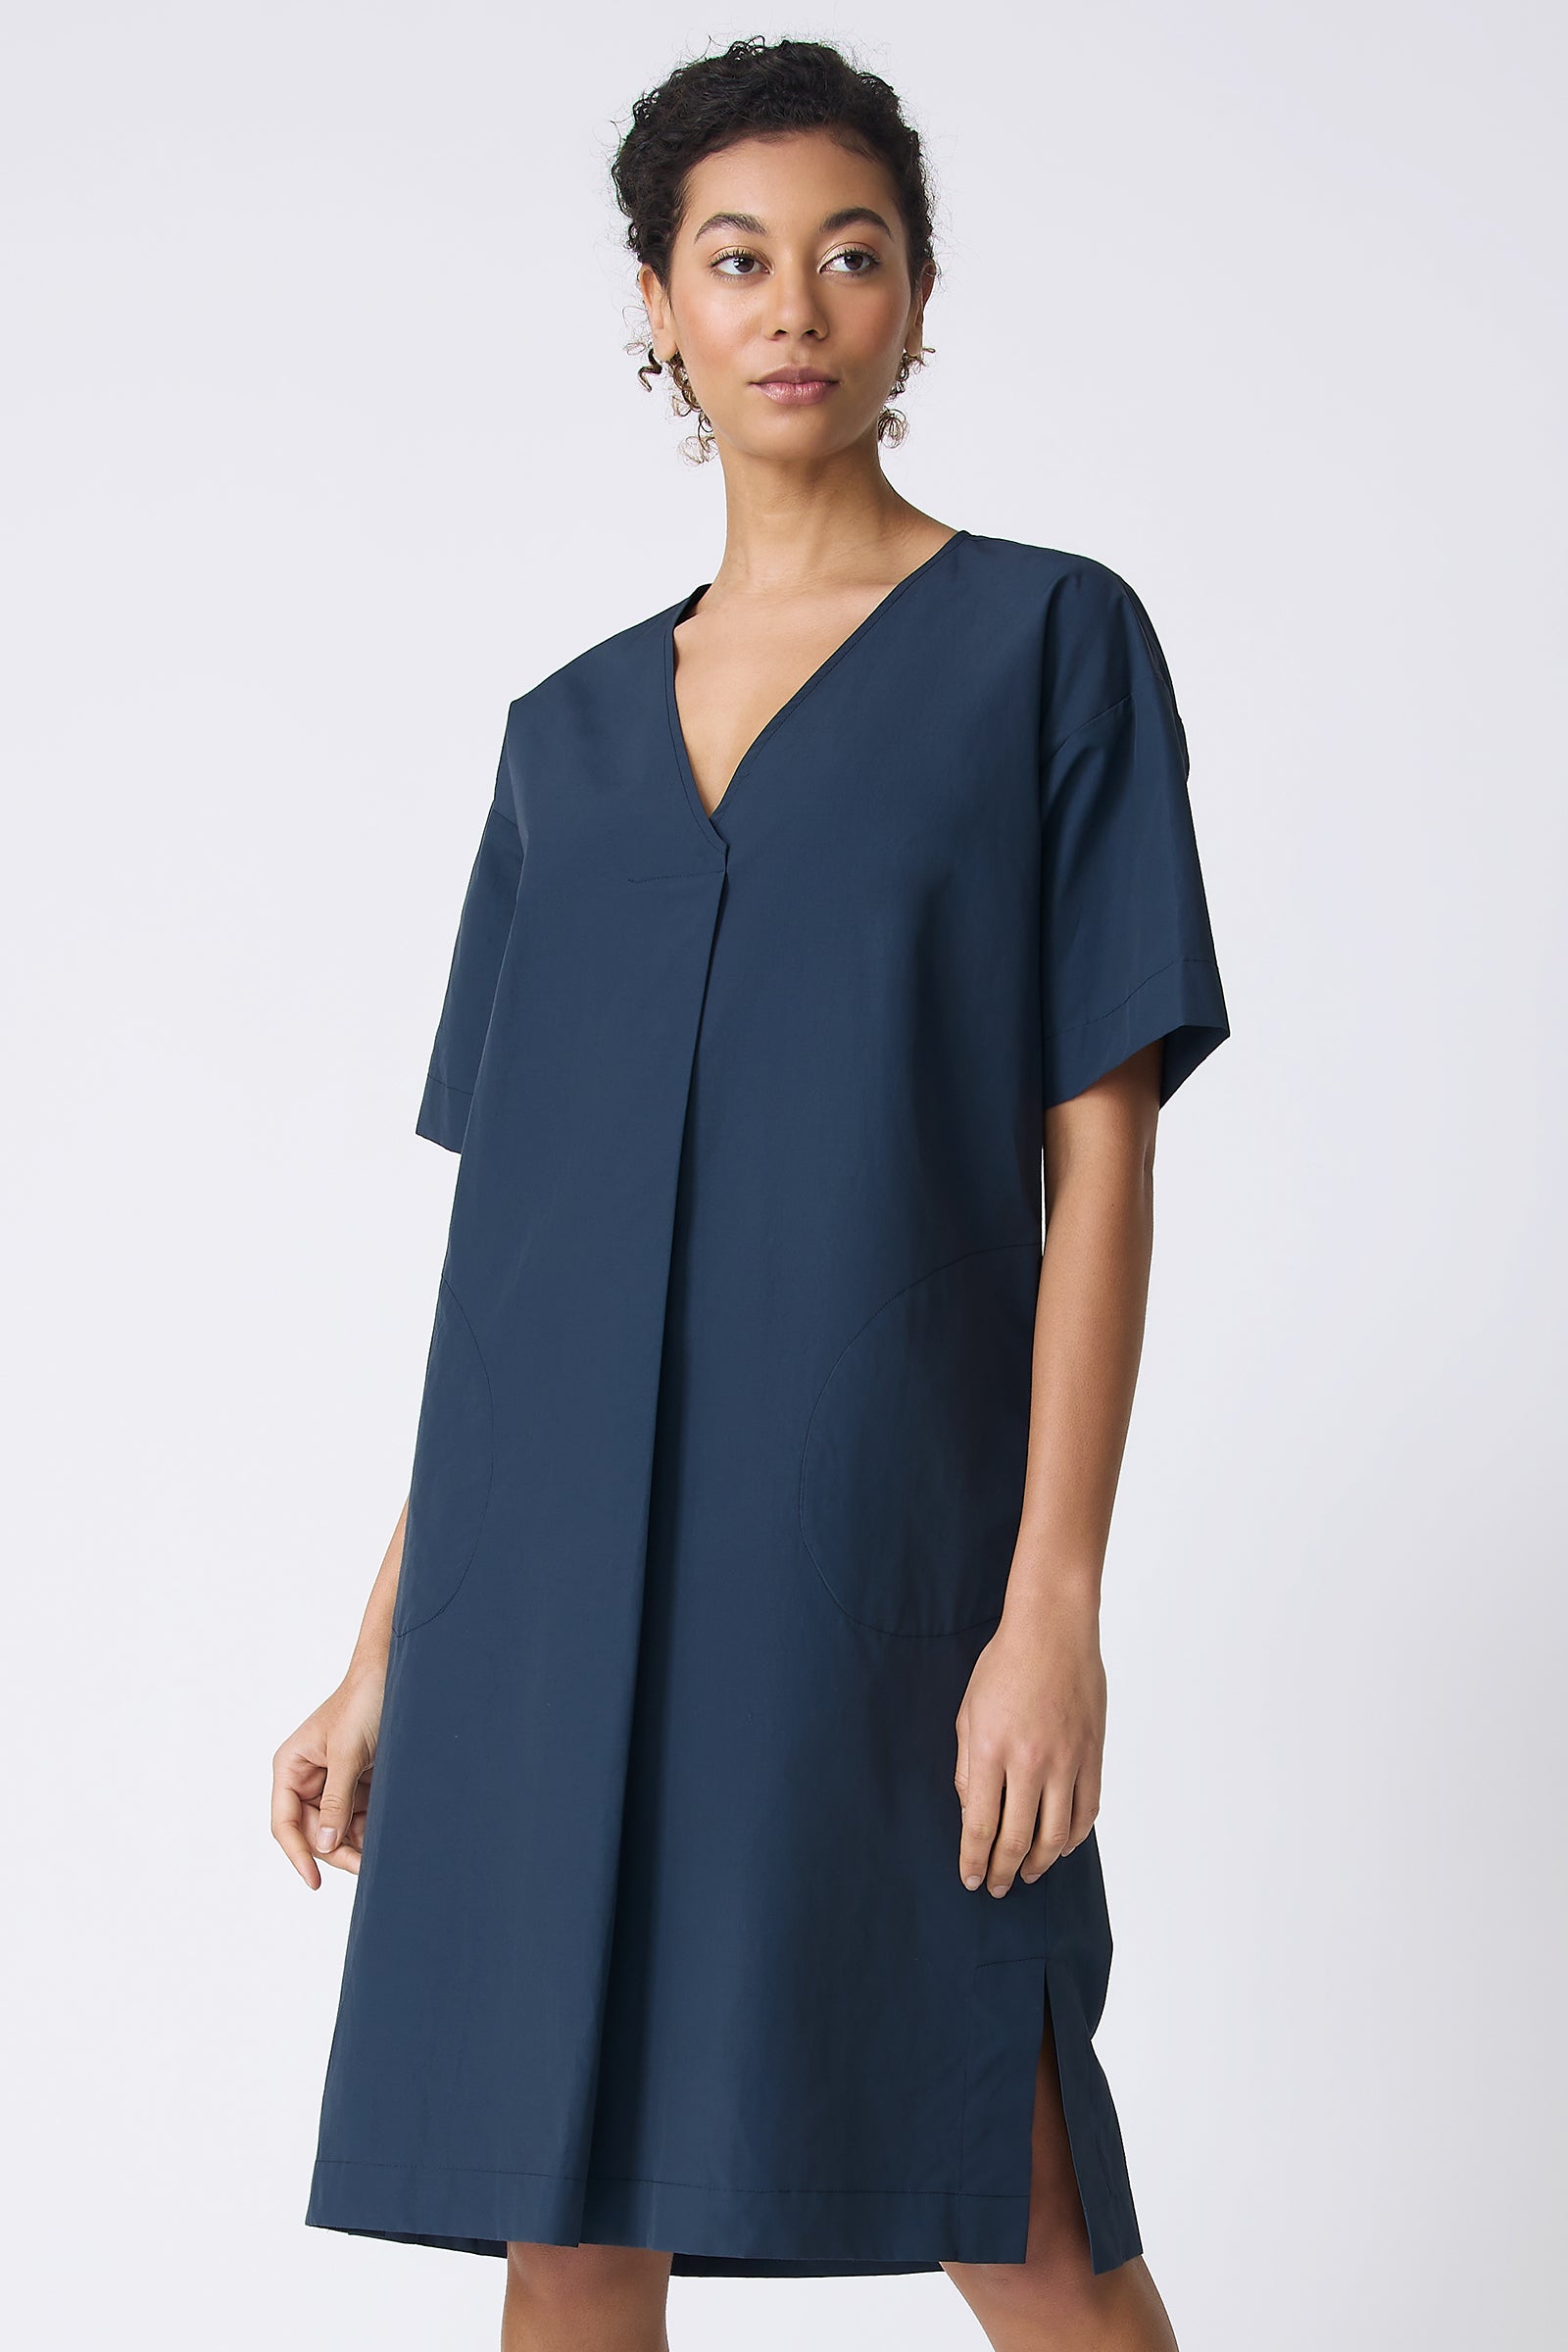 Kal Rieman Cara Fold Front Dress in Summer Navy on model front view